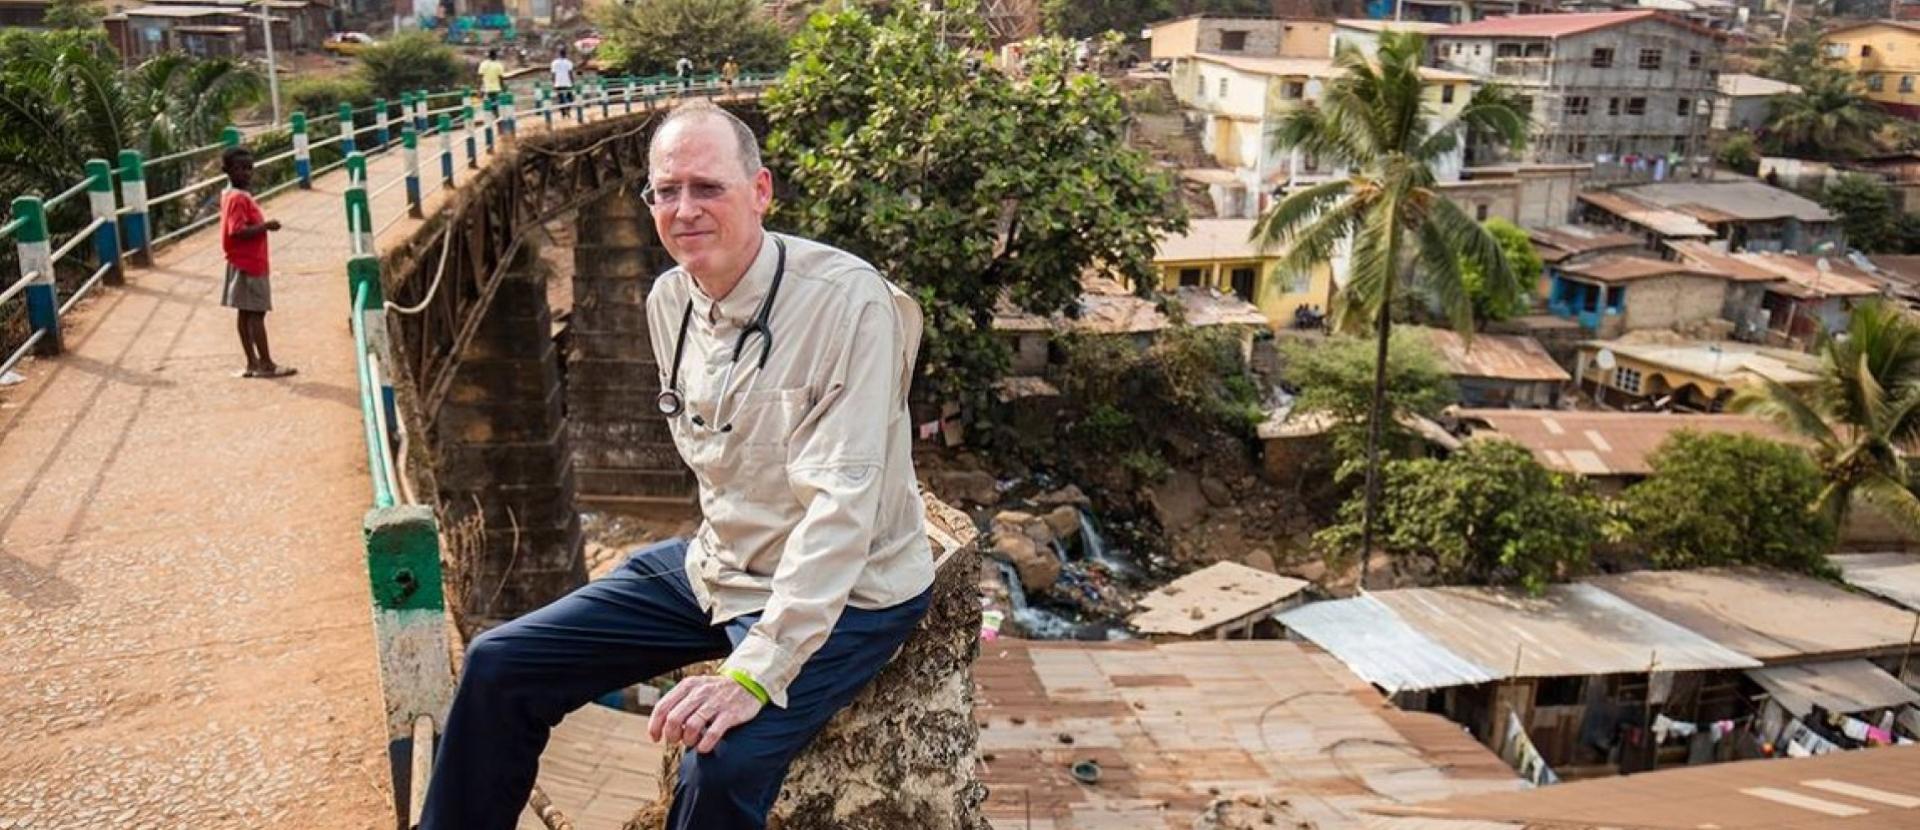 The late Dr. Paul Farmer sits on a low wall in an unidenfitied location.